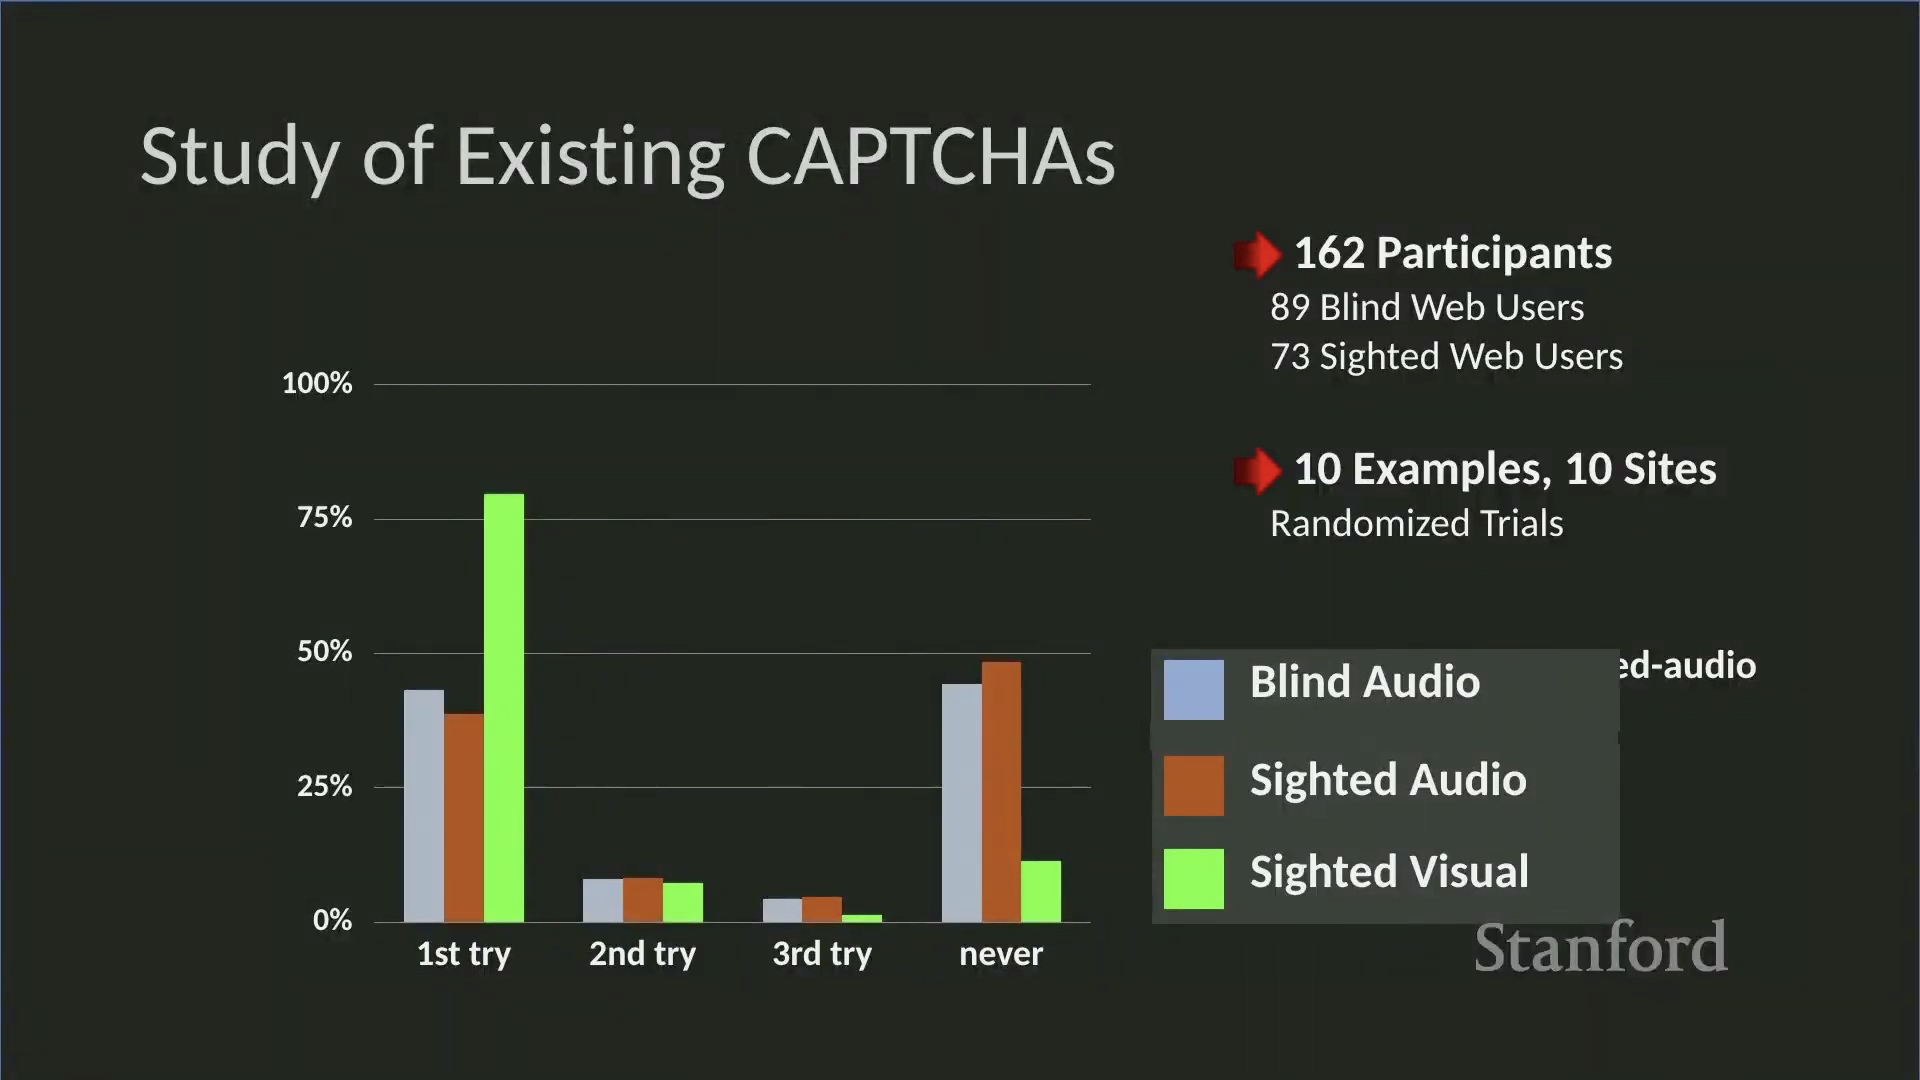 This slide shows a short clip of a presenter who did not describe his slides. The slide he presented included the title: Study of Existing CAPTCHAs. There is a chart displaying below it. The chart displayed the percentage of people successfully entering the CAPTCHAS within different trials. The x-axis represents the time of trials, including 1st try, 2nd try, 3rd try and never, the y-axis represents the percentage of users from 0-100% with 25% as interval. The measurement of three types of captcha are included in the chart including blind audio, sighted audio and sighted visual. In summary, most of the successful attempts for blind and sighted audio captcha are concentrated in 1st try and never, while for the sighted visual captcha most of the participants have successfully attempts on 1st try. On the right side of the chart are some details on study design. The first item initiated with the red arrow was the number of participants, which in total is 162 participants with 89 blind web users and 73 sighted web users recruited for the study. The second item initiated with the red arrow was the study procedure. There are a total of 10 examples and 10 sites in the randomized trials study design. Overall, the speaker barely described any of these visuals on his slide.